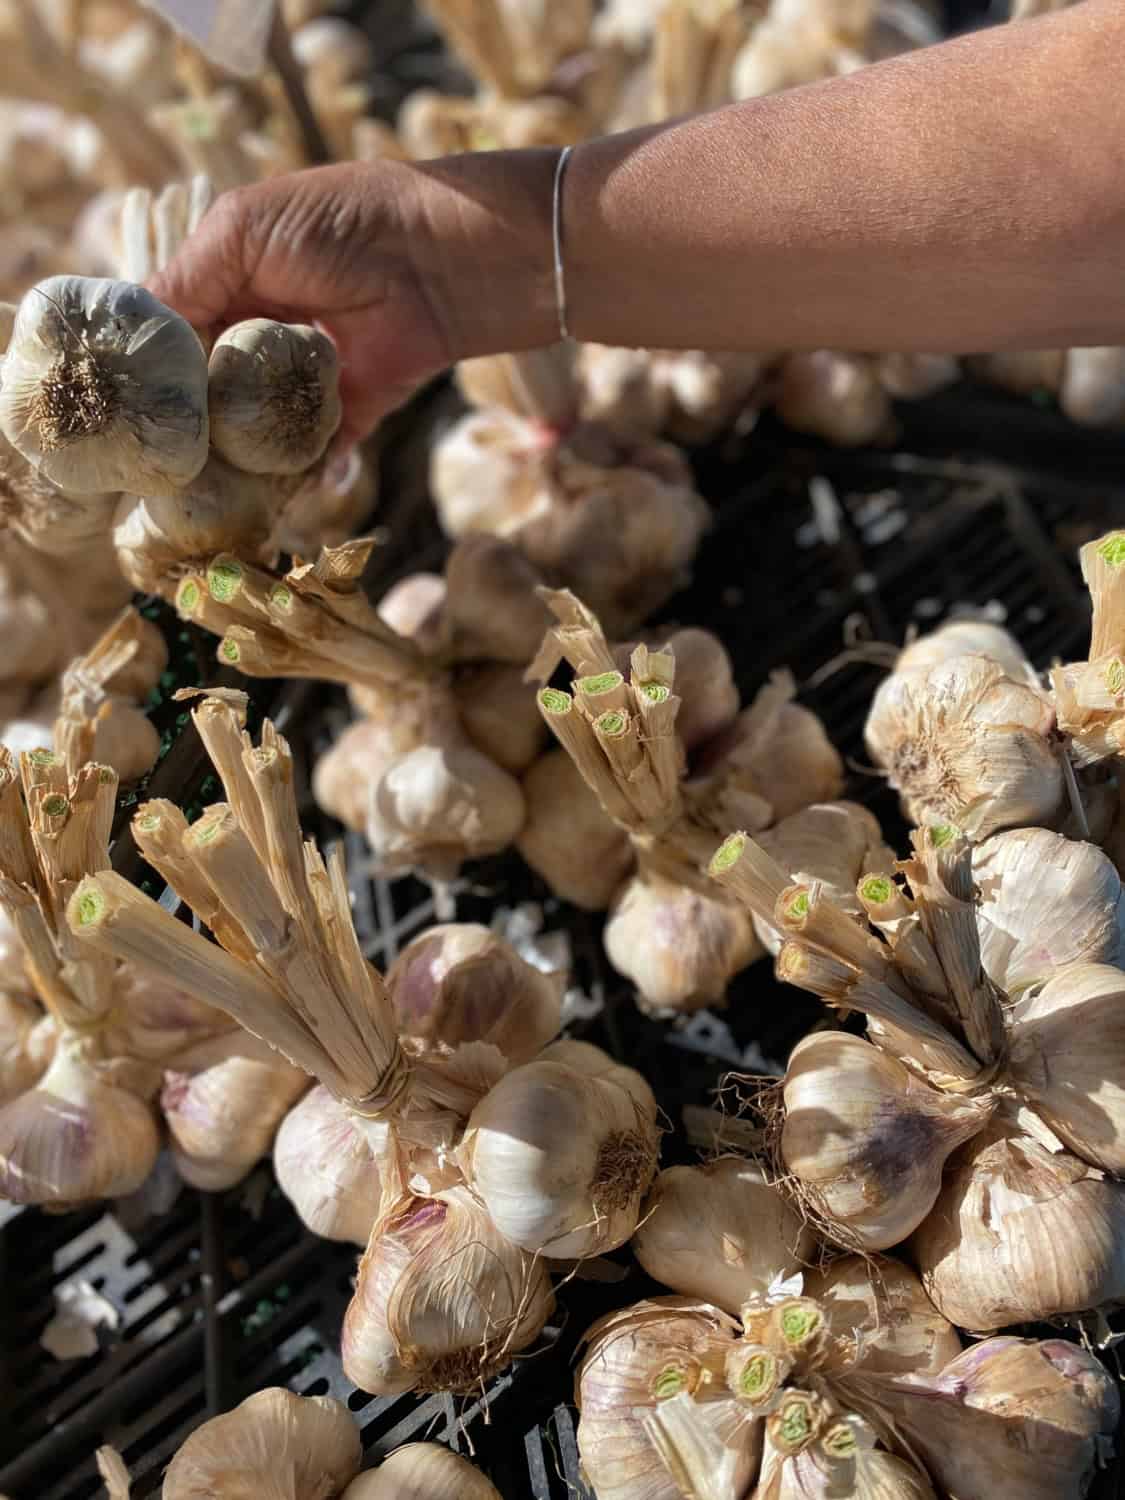 womans hand holding two bunches of garlic